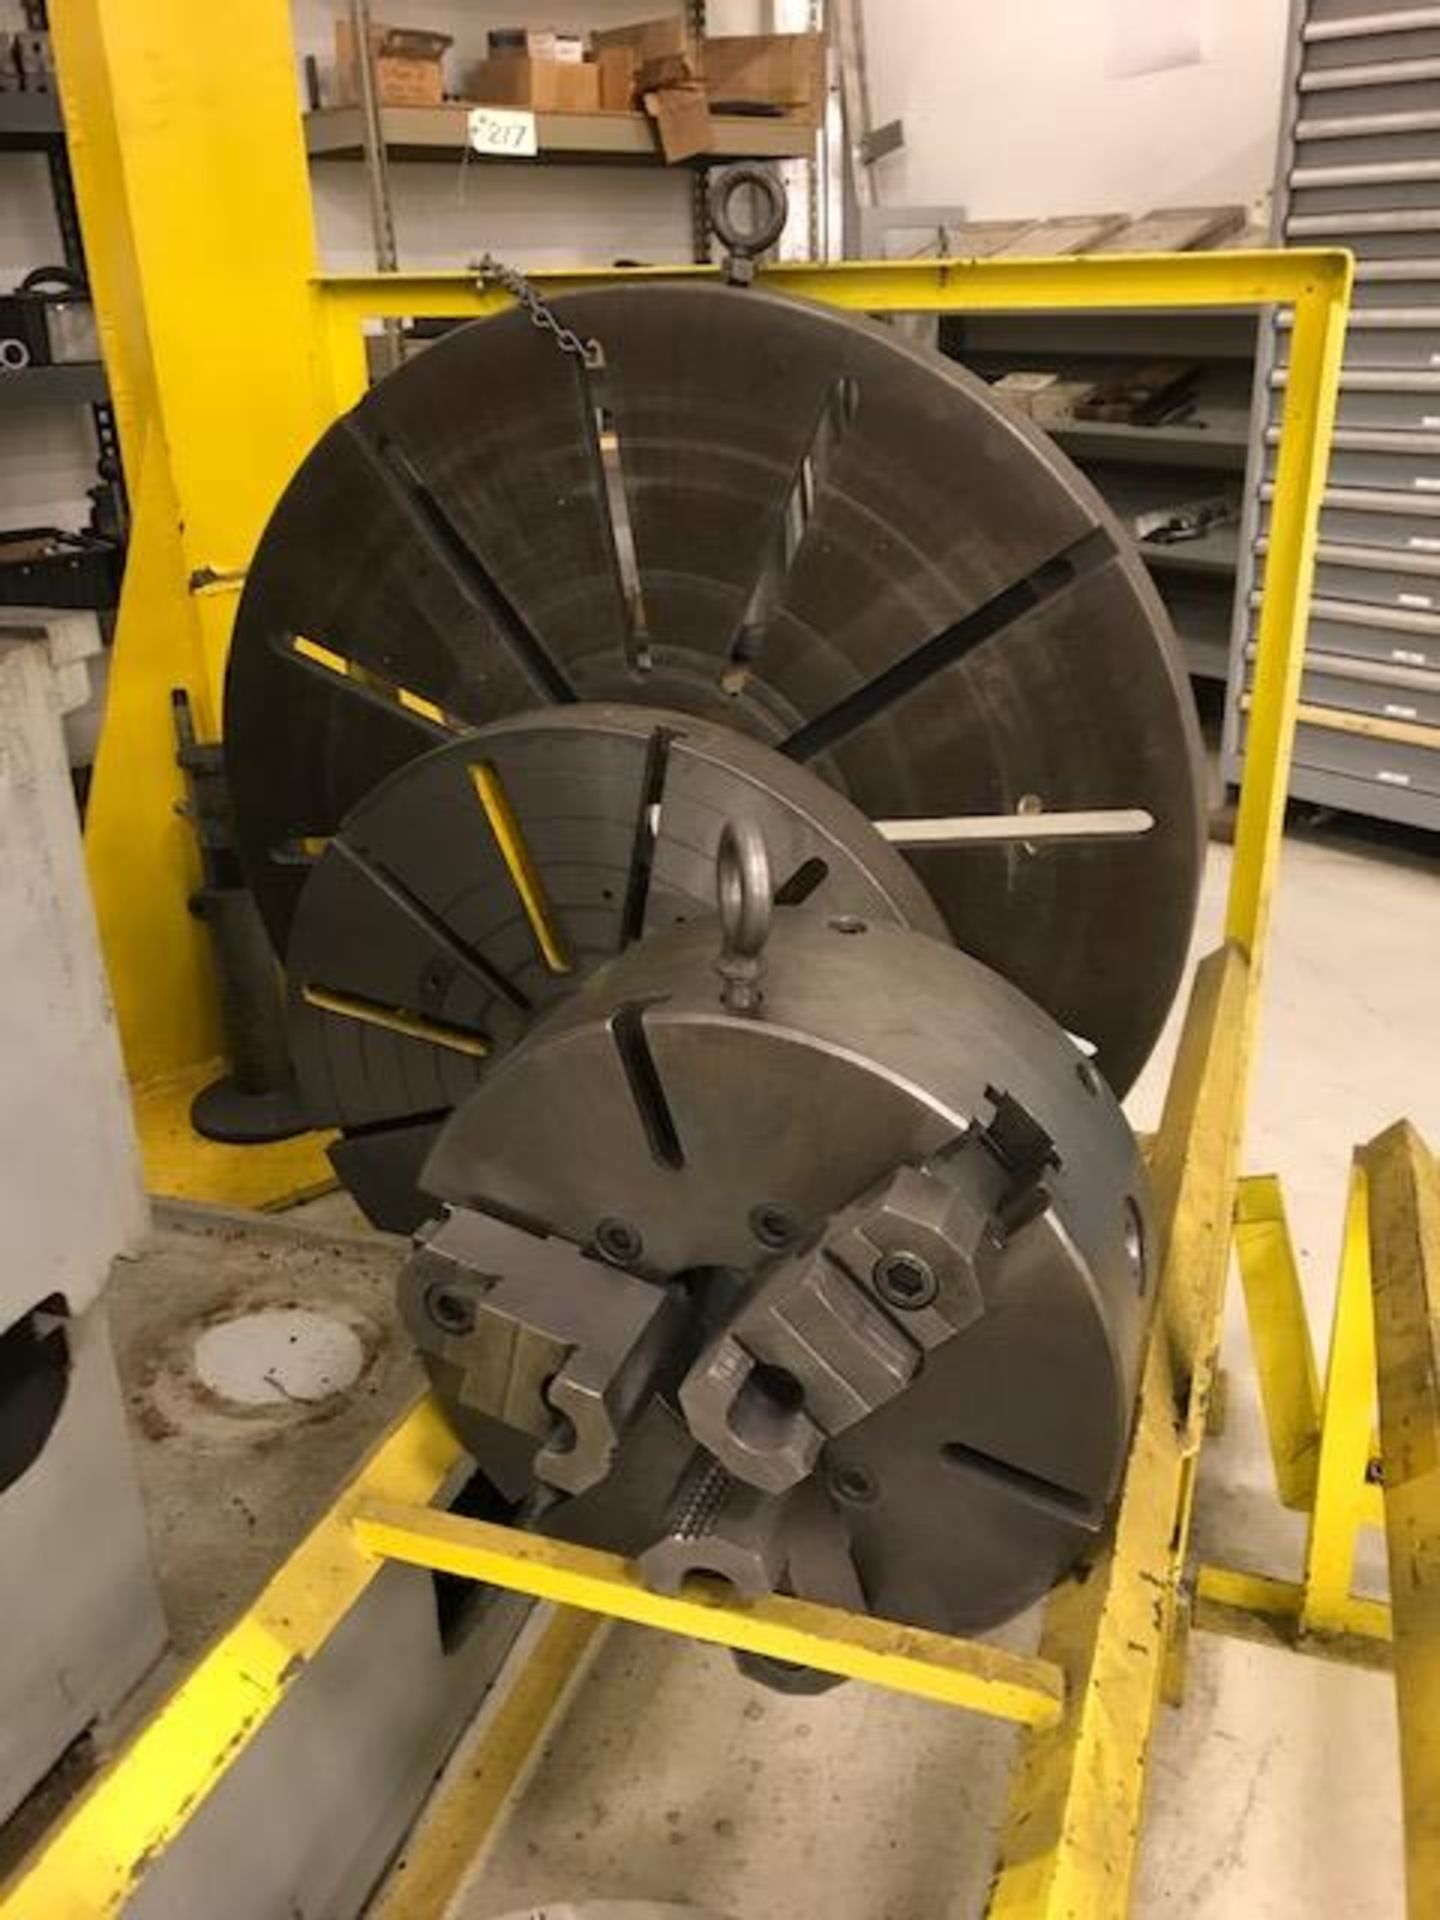 48" & 24" Faceplates & 12" 3-Jaw Chuck with Stand